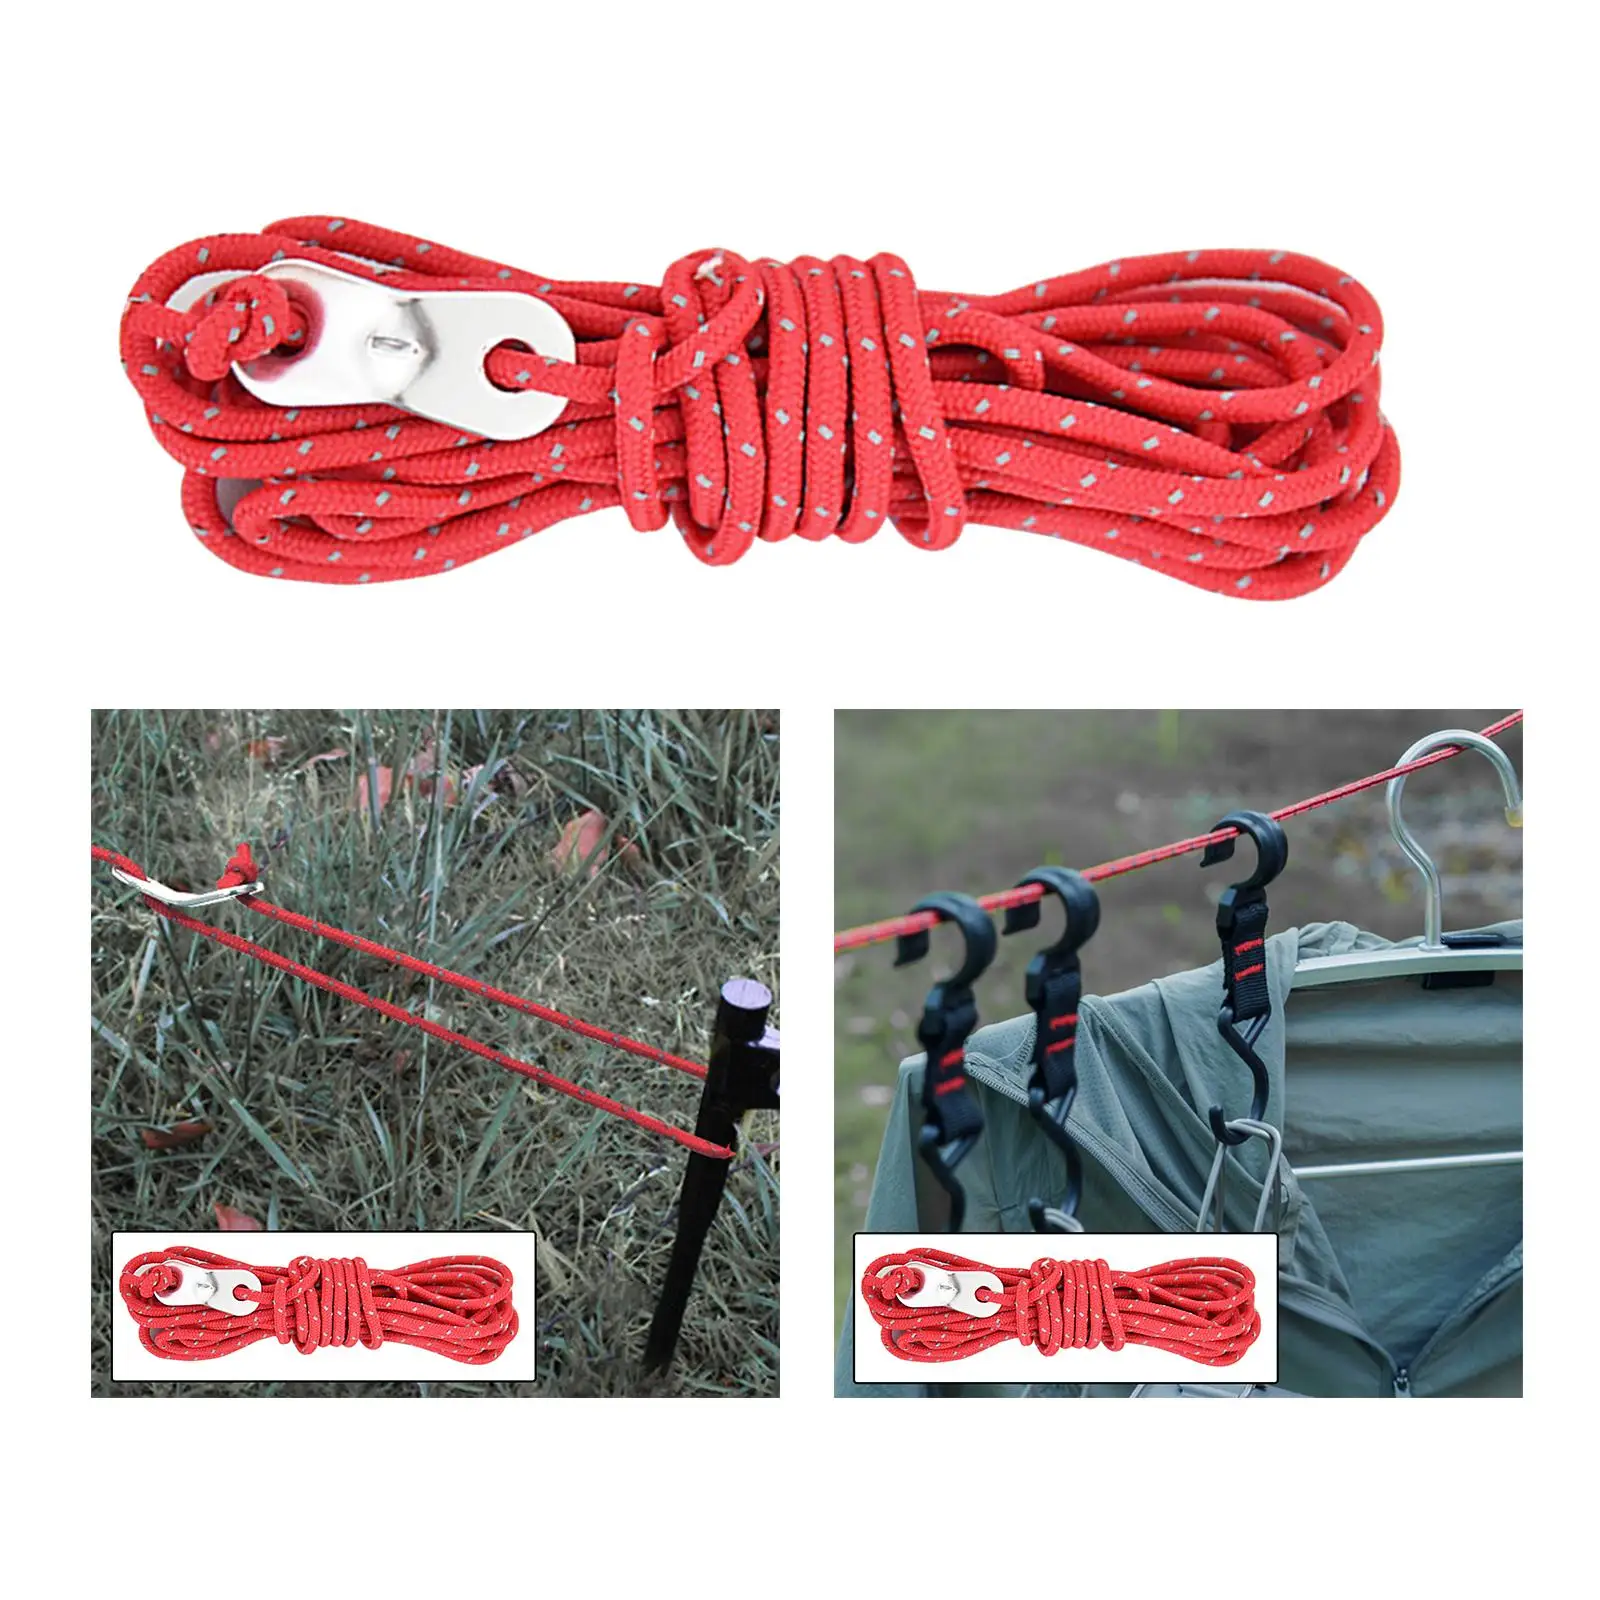 2x Windproof Wind Rope with Adjustment Buckle Accs Loose for Camping Tent Survival